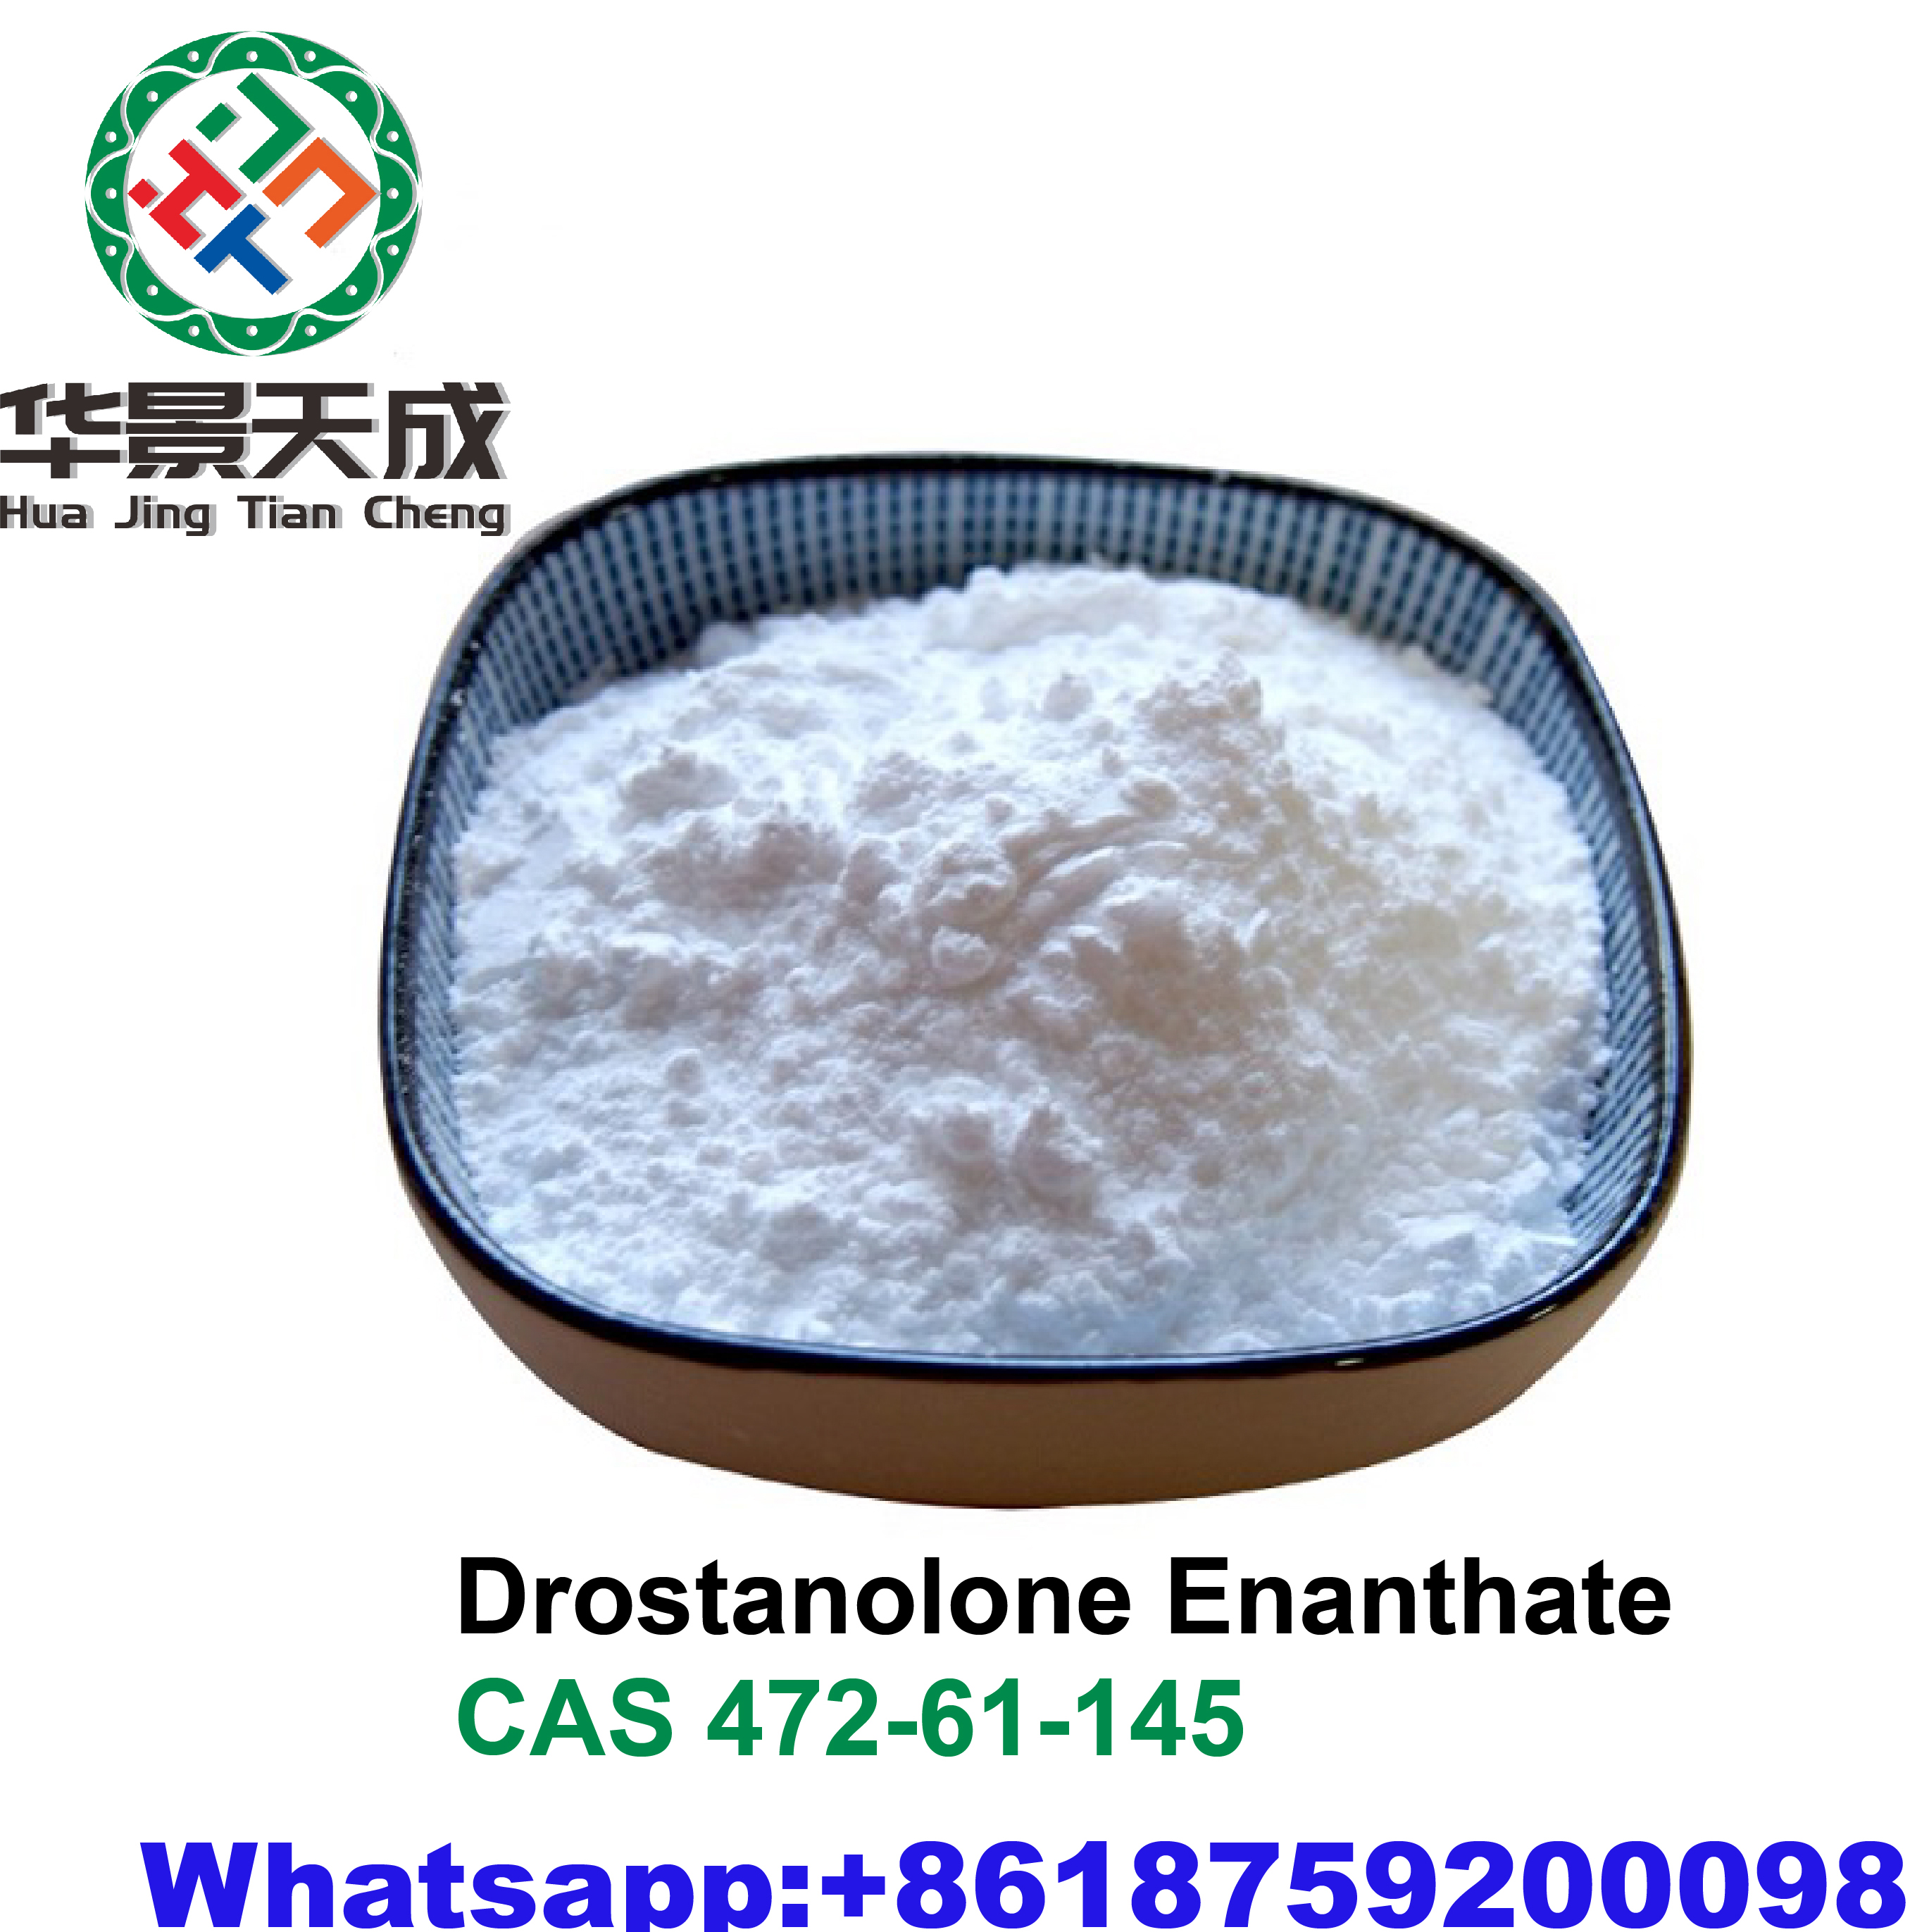 Drostanolone Enanthate Powder  99.1% Masternon Enanthate Raw Steroid Featured Image